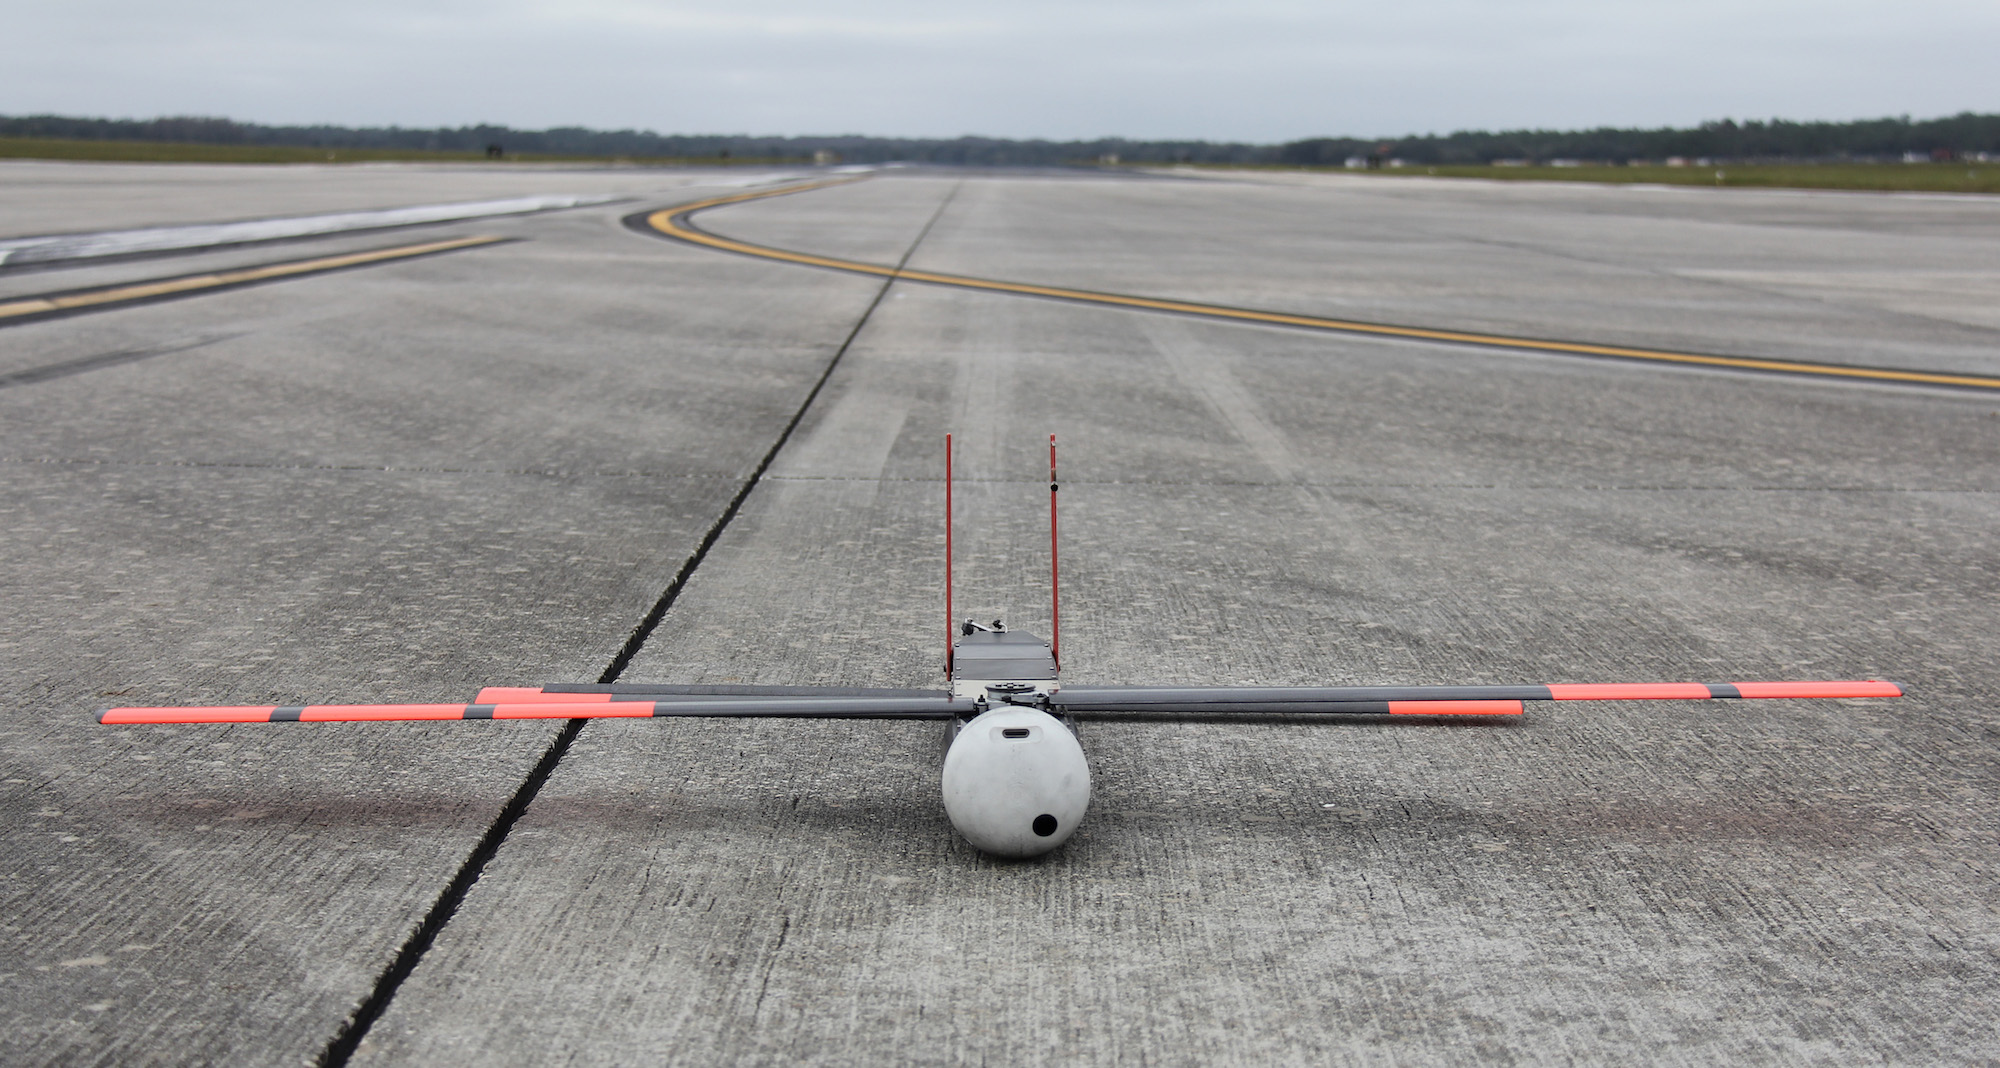 The Coyote on the tarmac after a successful demonstration flight in 2016. Image credit: NOAA